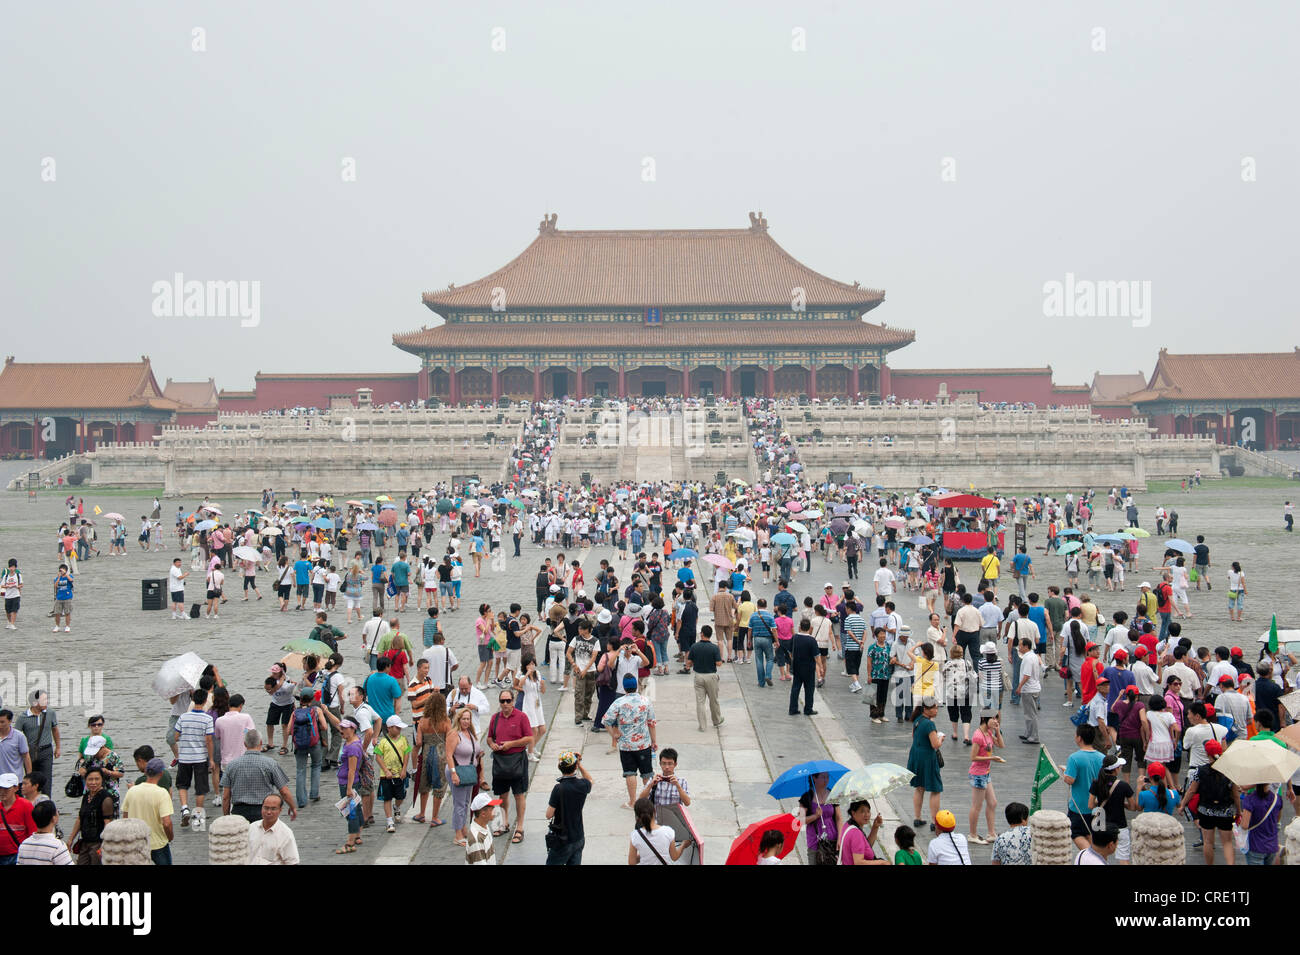 Crowd, large square, Hall of Supreme Harmony, Forbidden City, imperial palace, Beijing, People's Republic of China, Asia Stock Photo